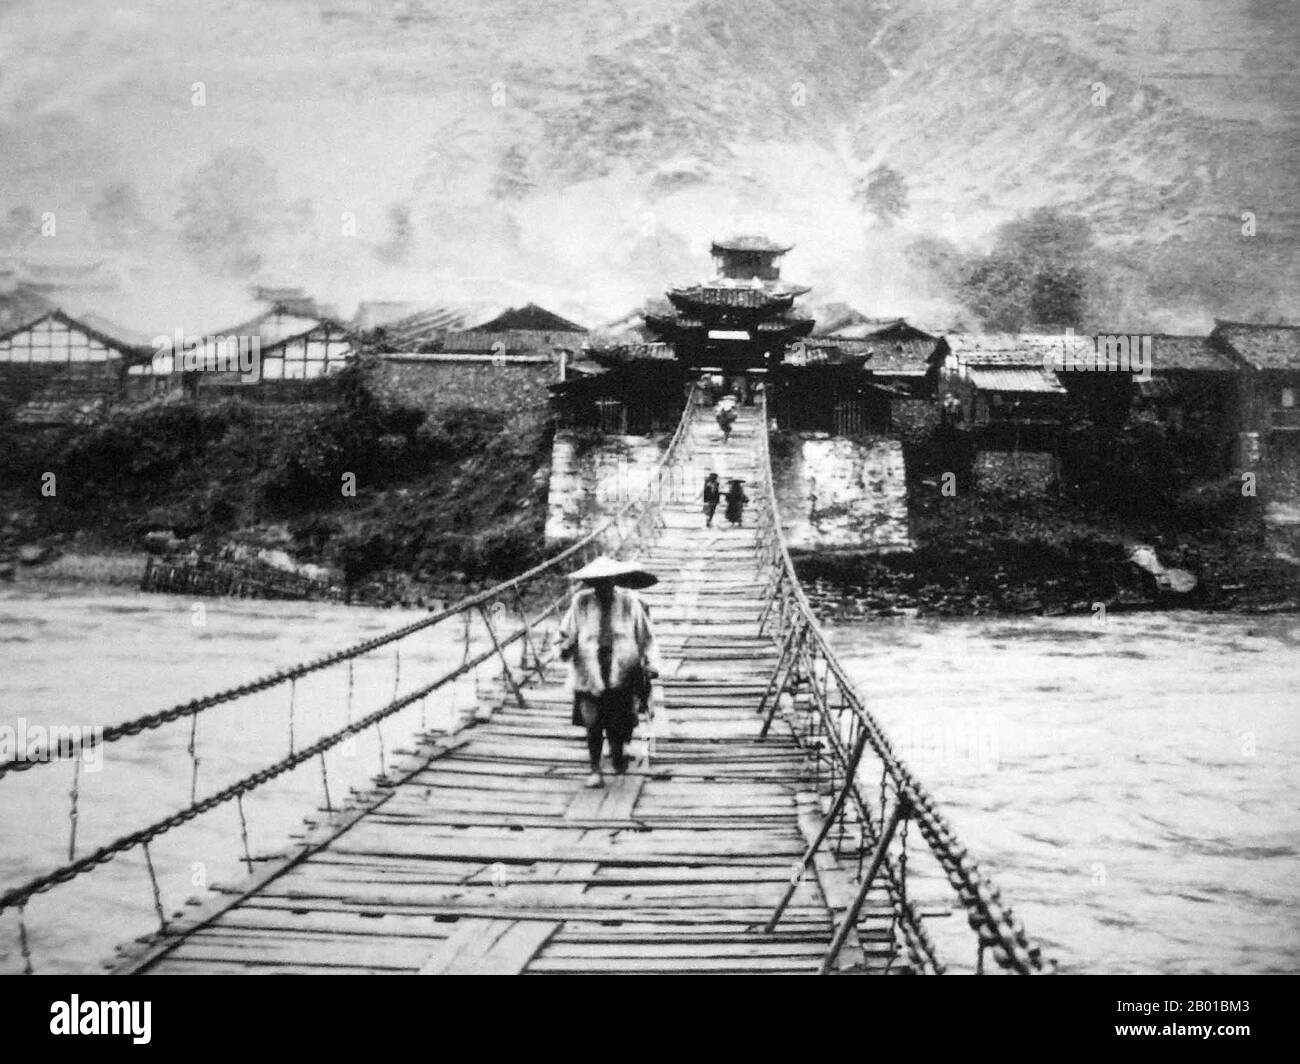 China: Muleteers crossing the Luding Bridge over the Dadu River in Luding County, Garze Tibetan Autonomous Prefecture, Sichuan. Photo by Auguste Francois (20 August 1857 - 4 July 1935), c. 1900.  The Tea Horse Road (Cha Ma Dao) was a network of mule caravan paths winding through the mountains of Yunnan, Sichuan and Tibet in Southwest China. It is also sometimes referred to as the Southern Silk Road and Ancient Tea Horse Road. From around a thousand years ago, the Ancient Tea Route was a trade link from Yunnan, one of the first tea-producing regions, to India via Myanmar. Stock Photo